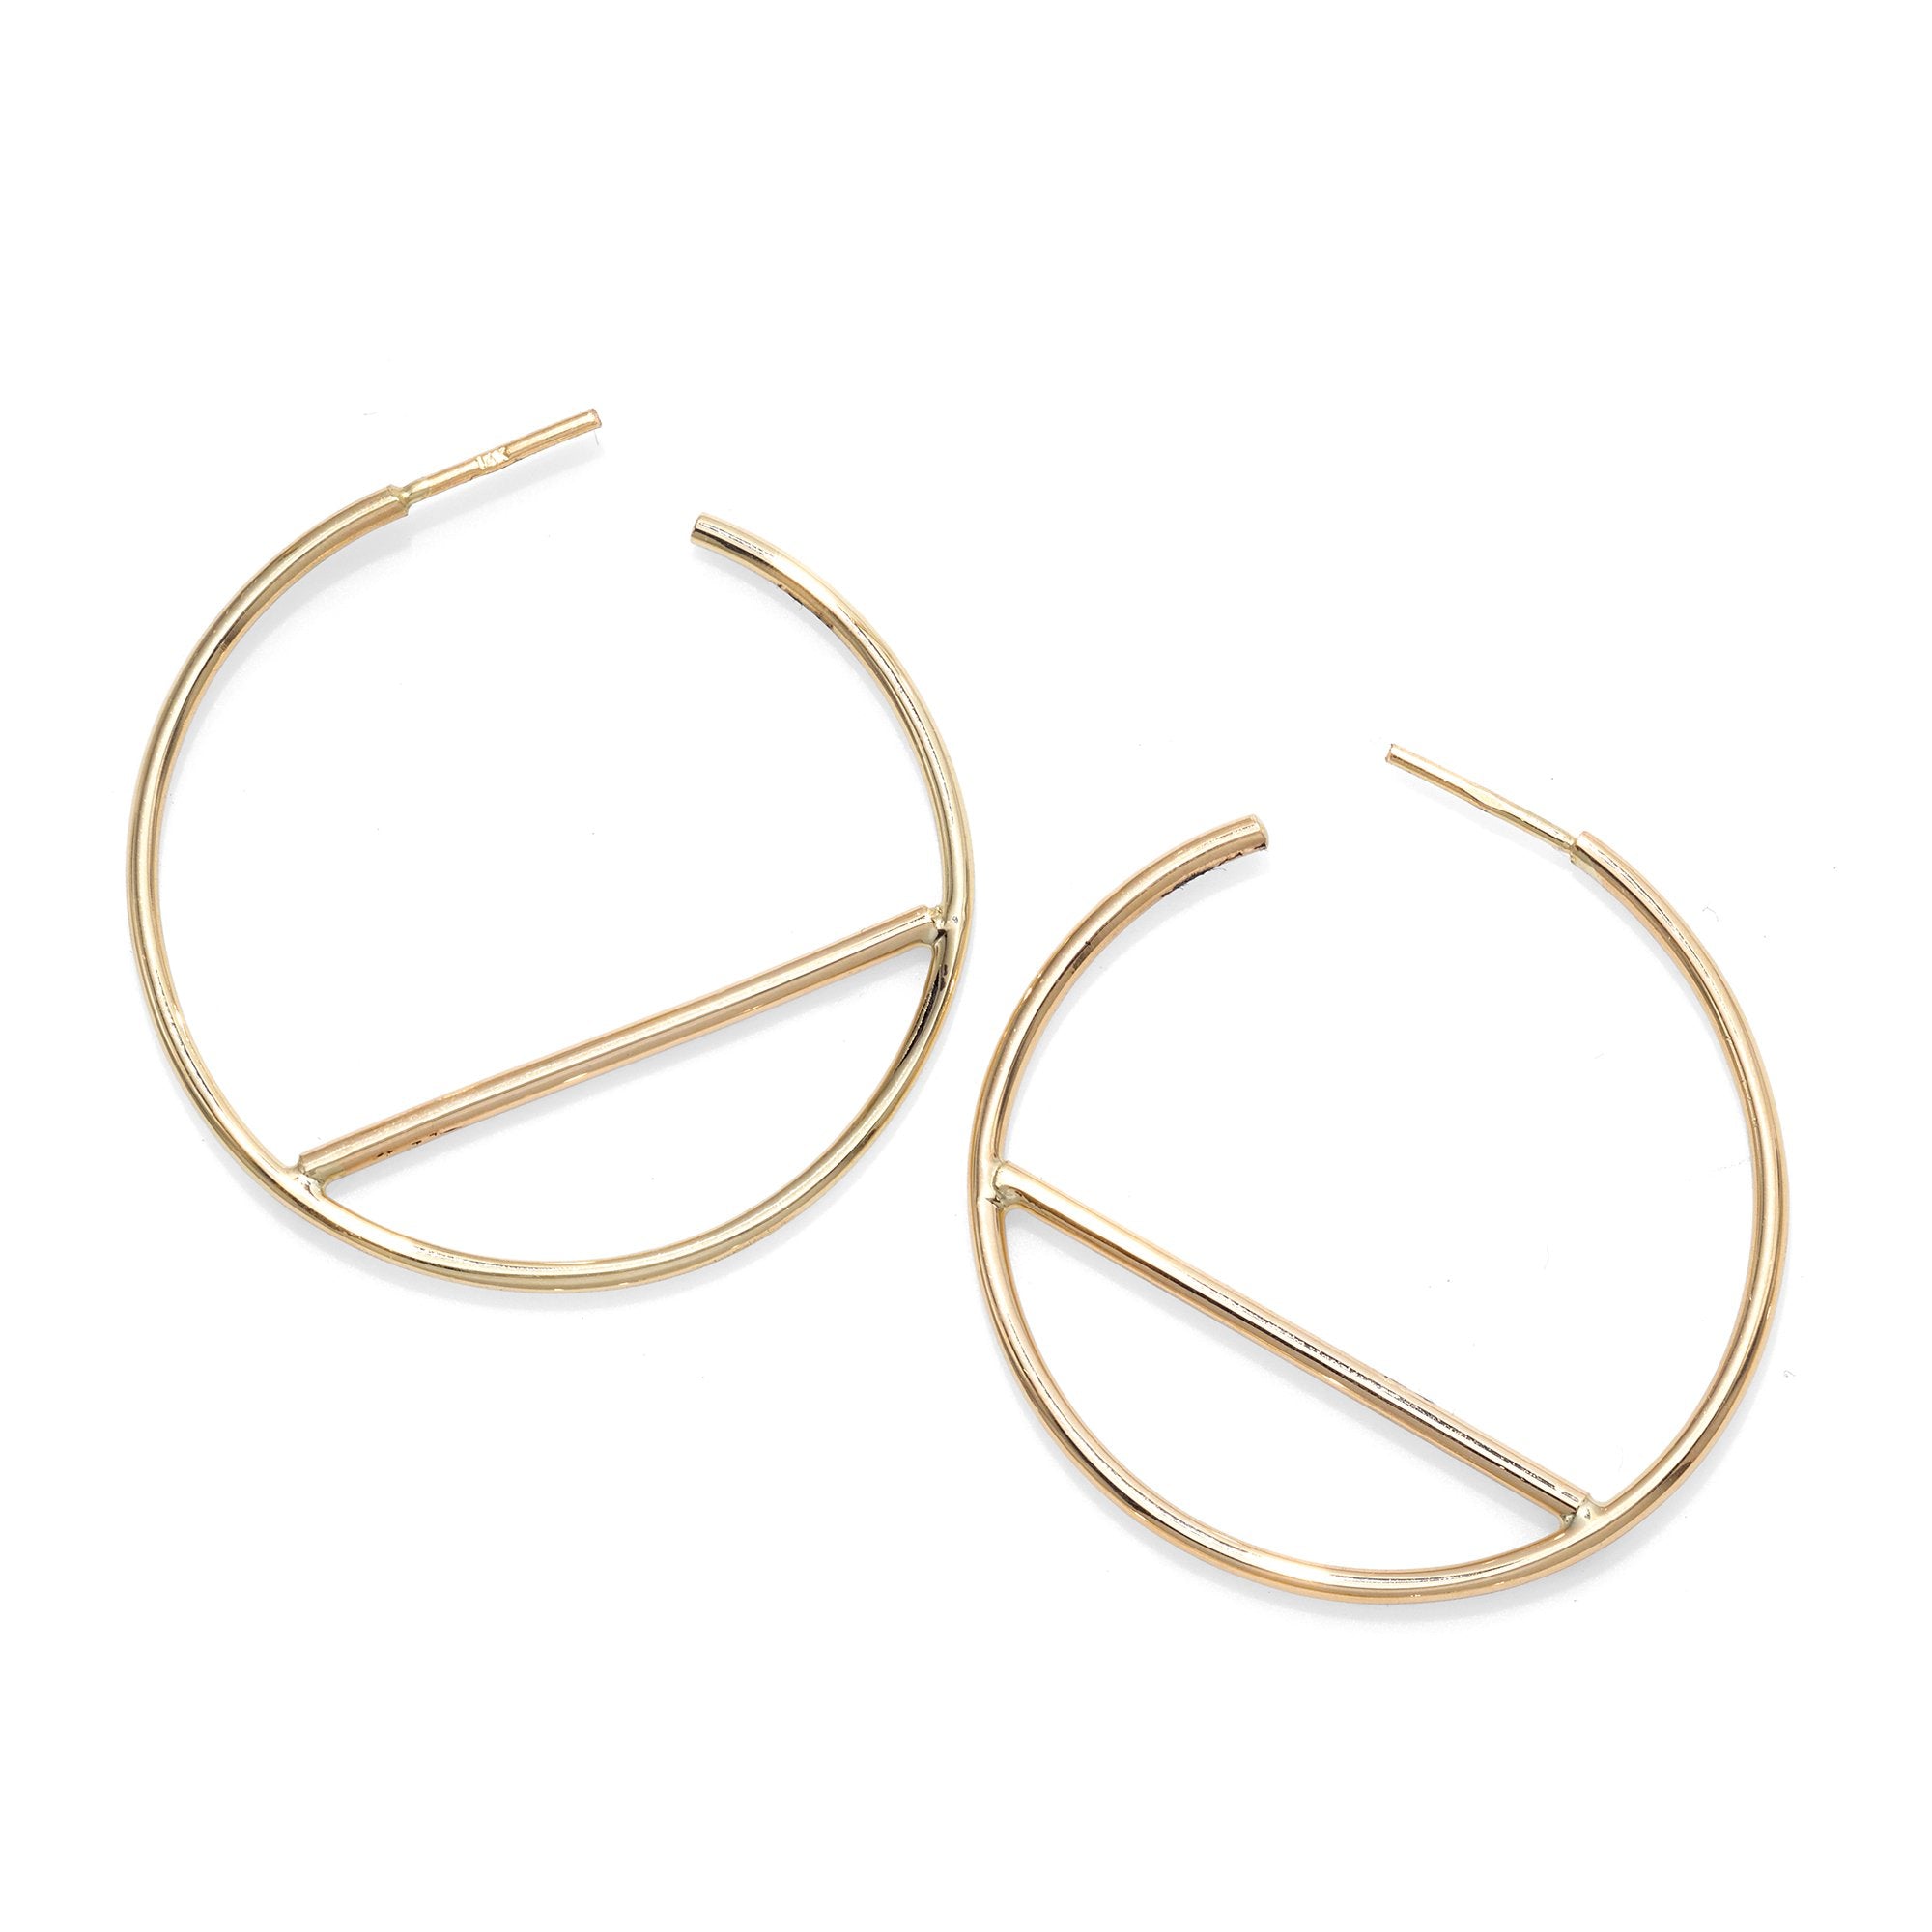 Polished Hoop Earring with Push Back Clasp